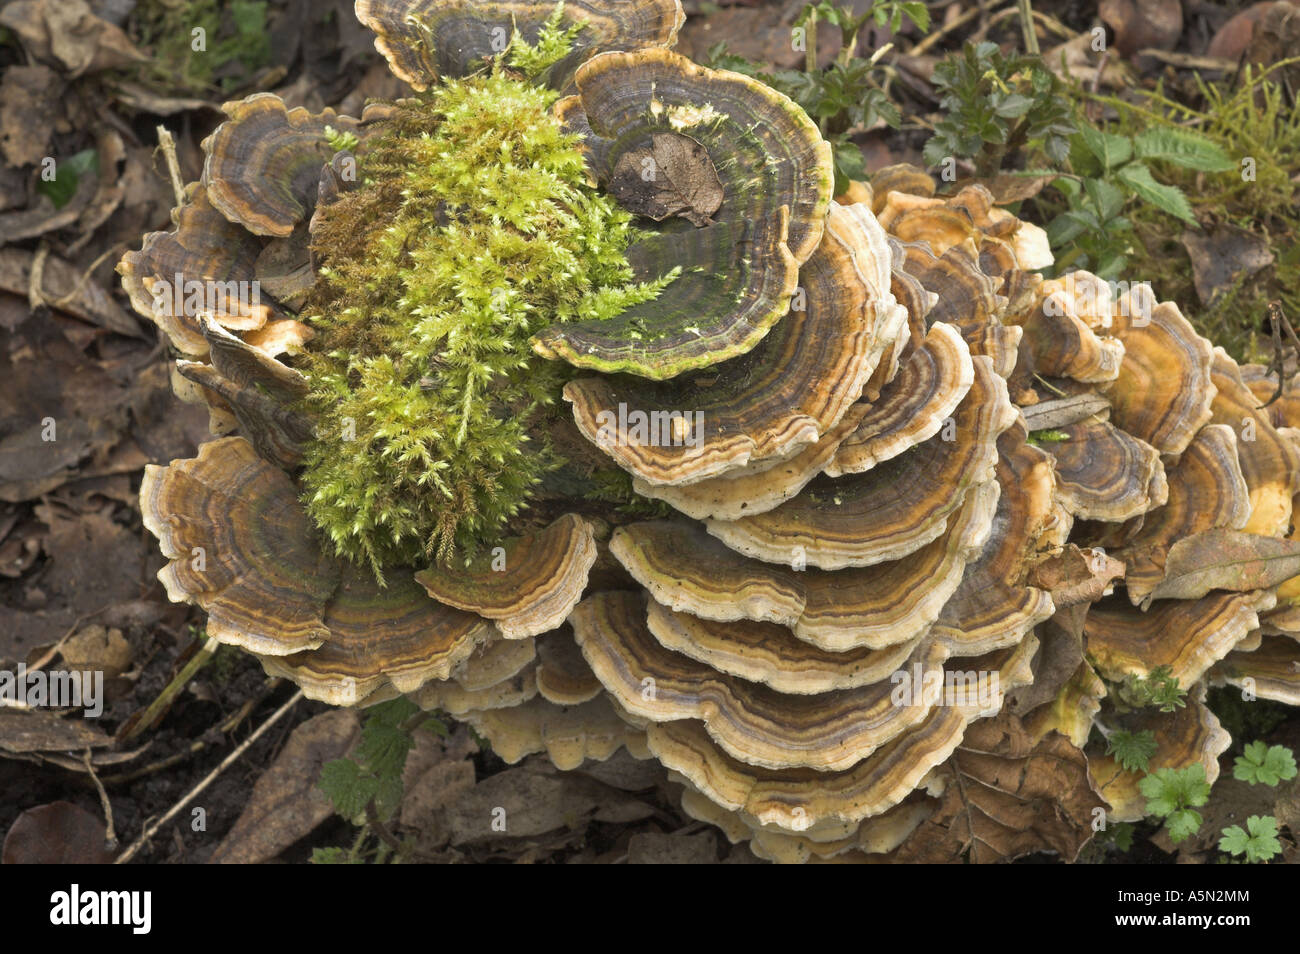 Bracket fungus trametes spp abstract study of fruiting bodies growing on alder stump Norfolk UK February Stock Photo